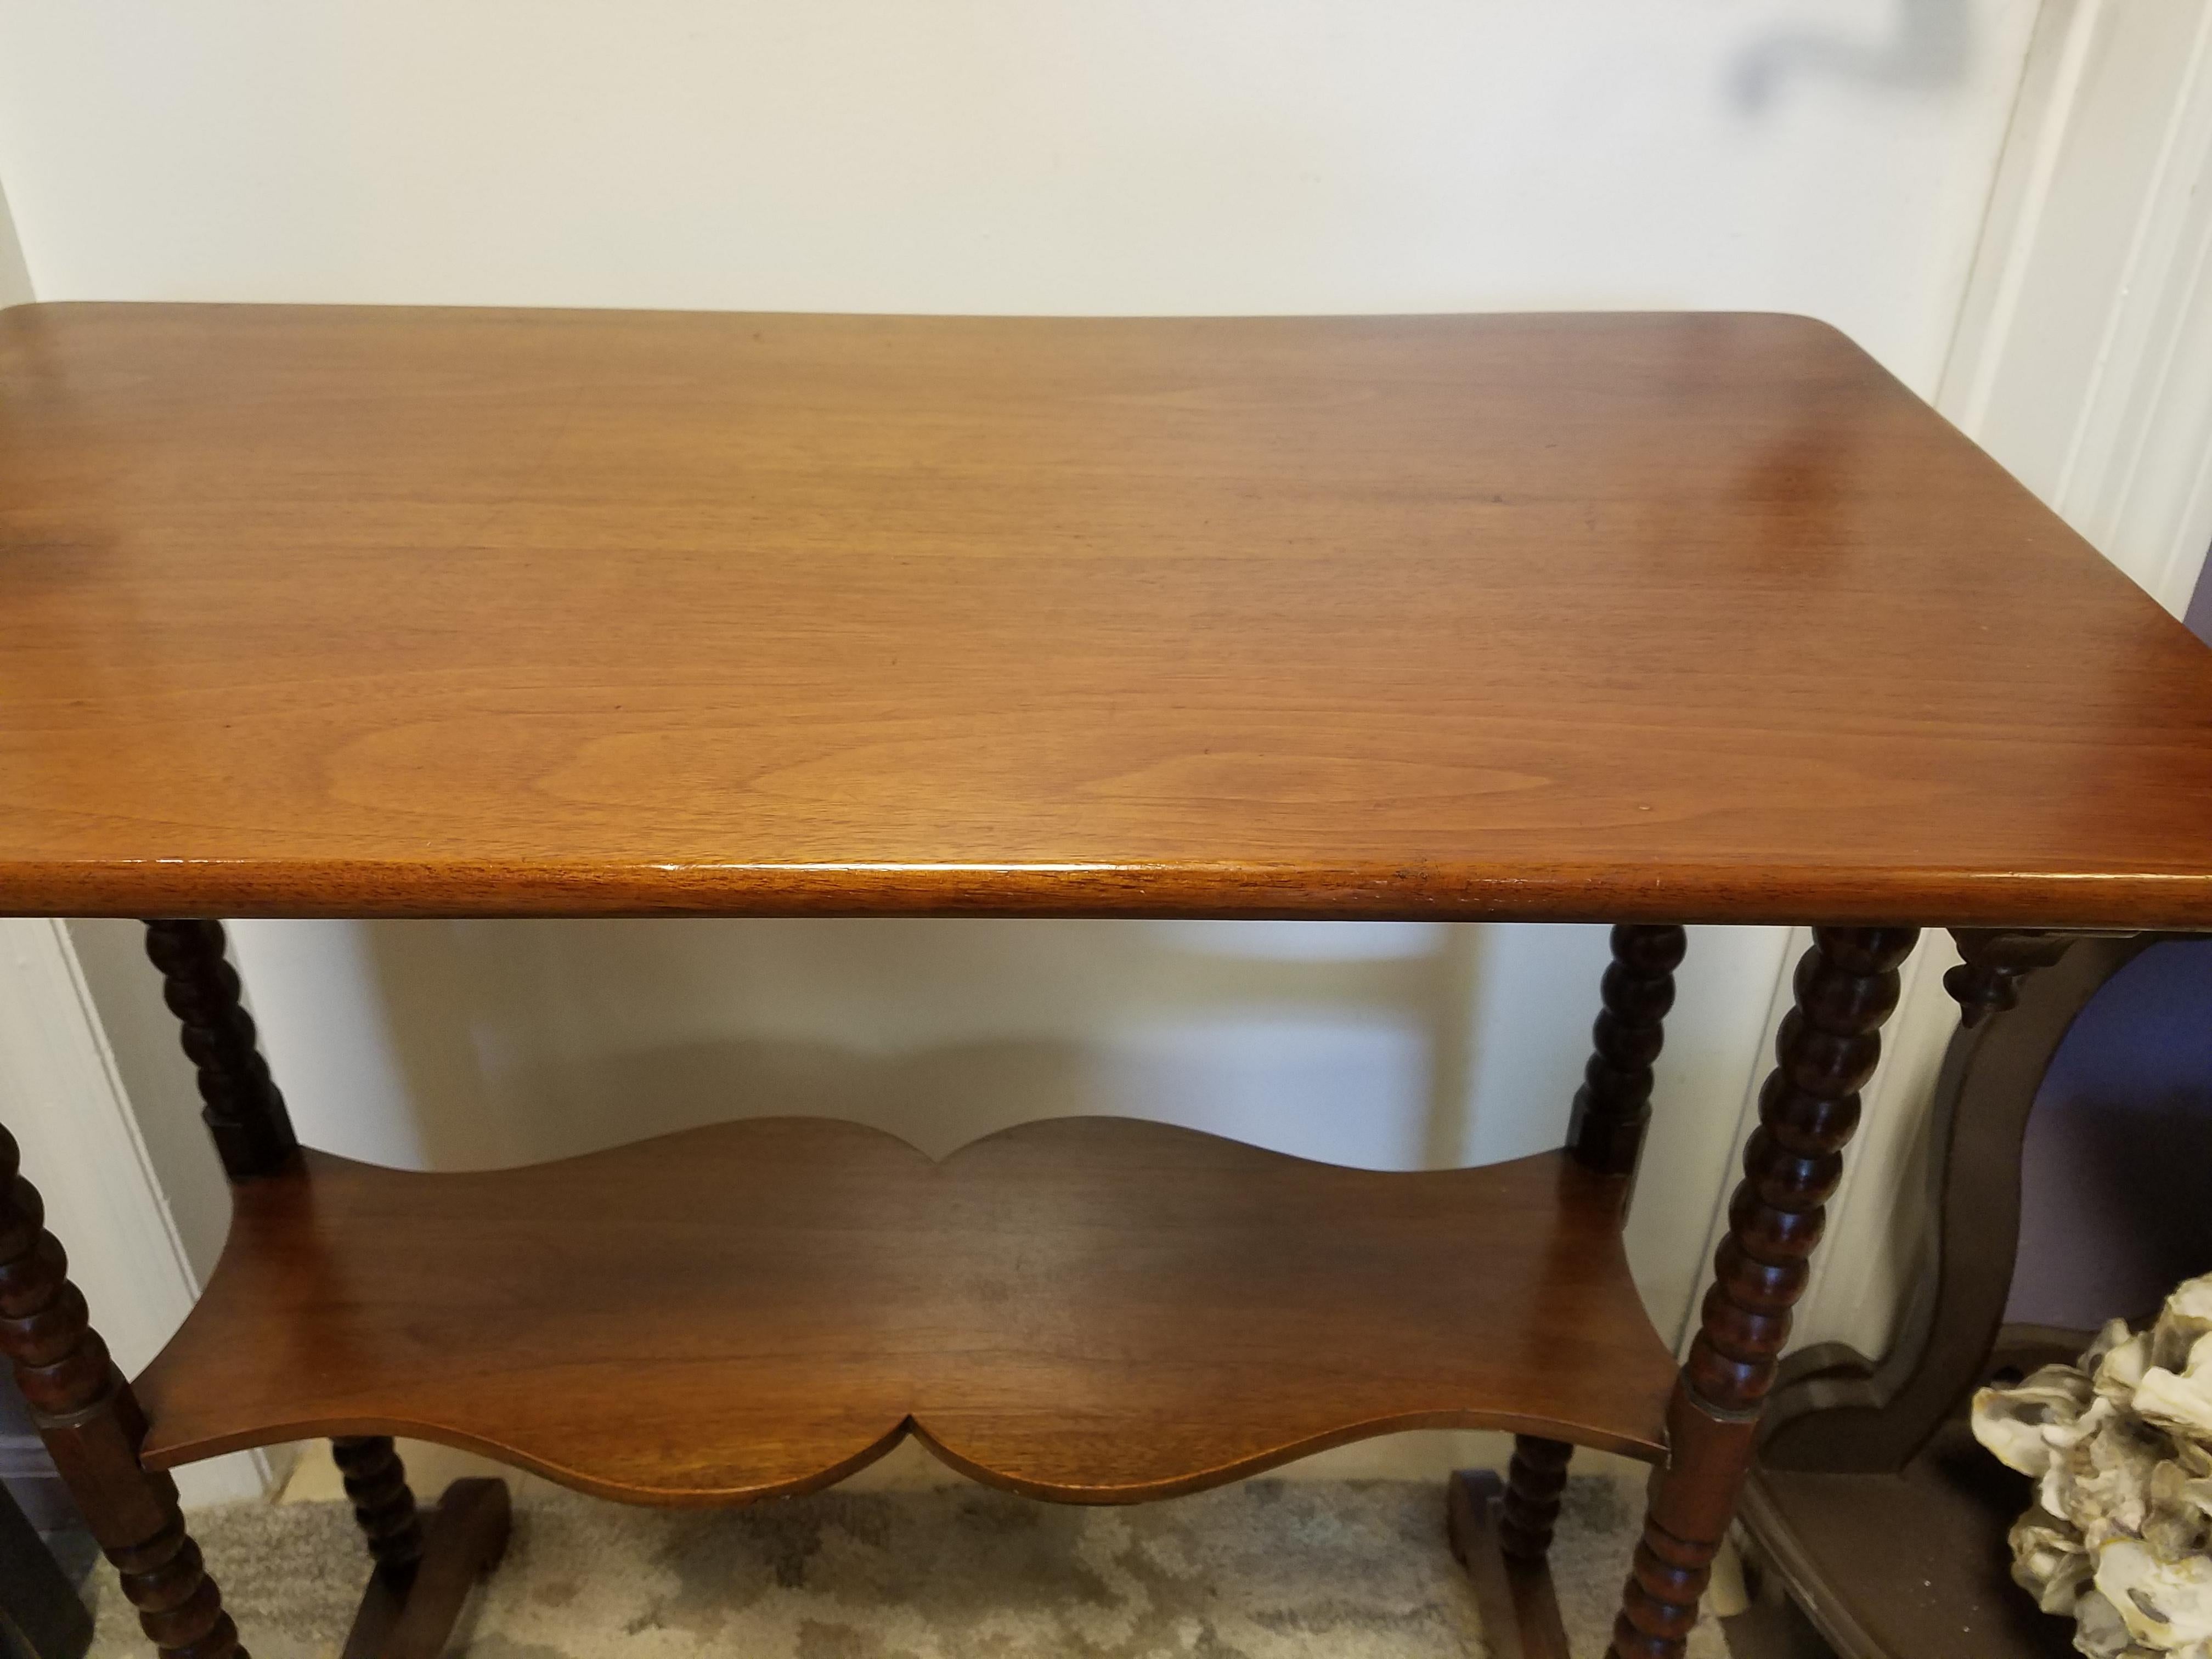 Antique American maple accent table. Handmade with beautiful turned legs and bottom support in a repeating ball design. Interesting carved apron on both ends. Please see all photos for details. No chips or cracks in the wood, a few surface scratches